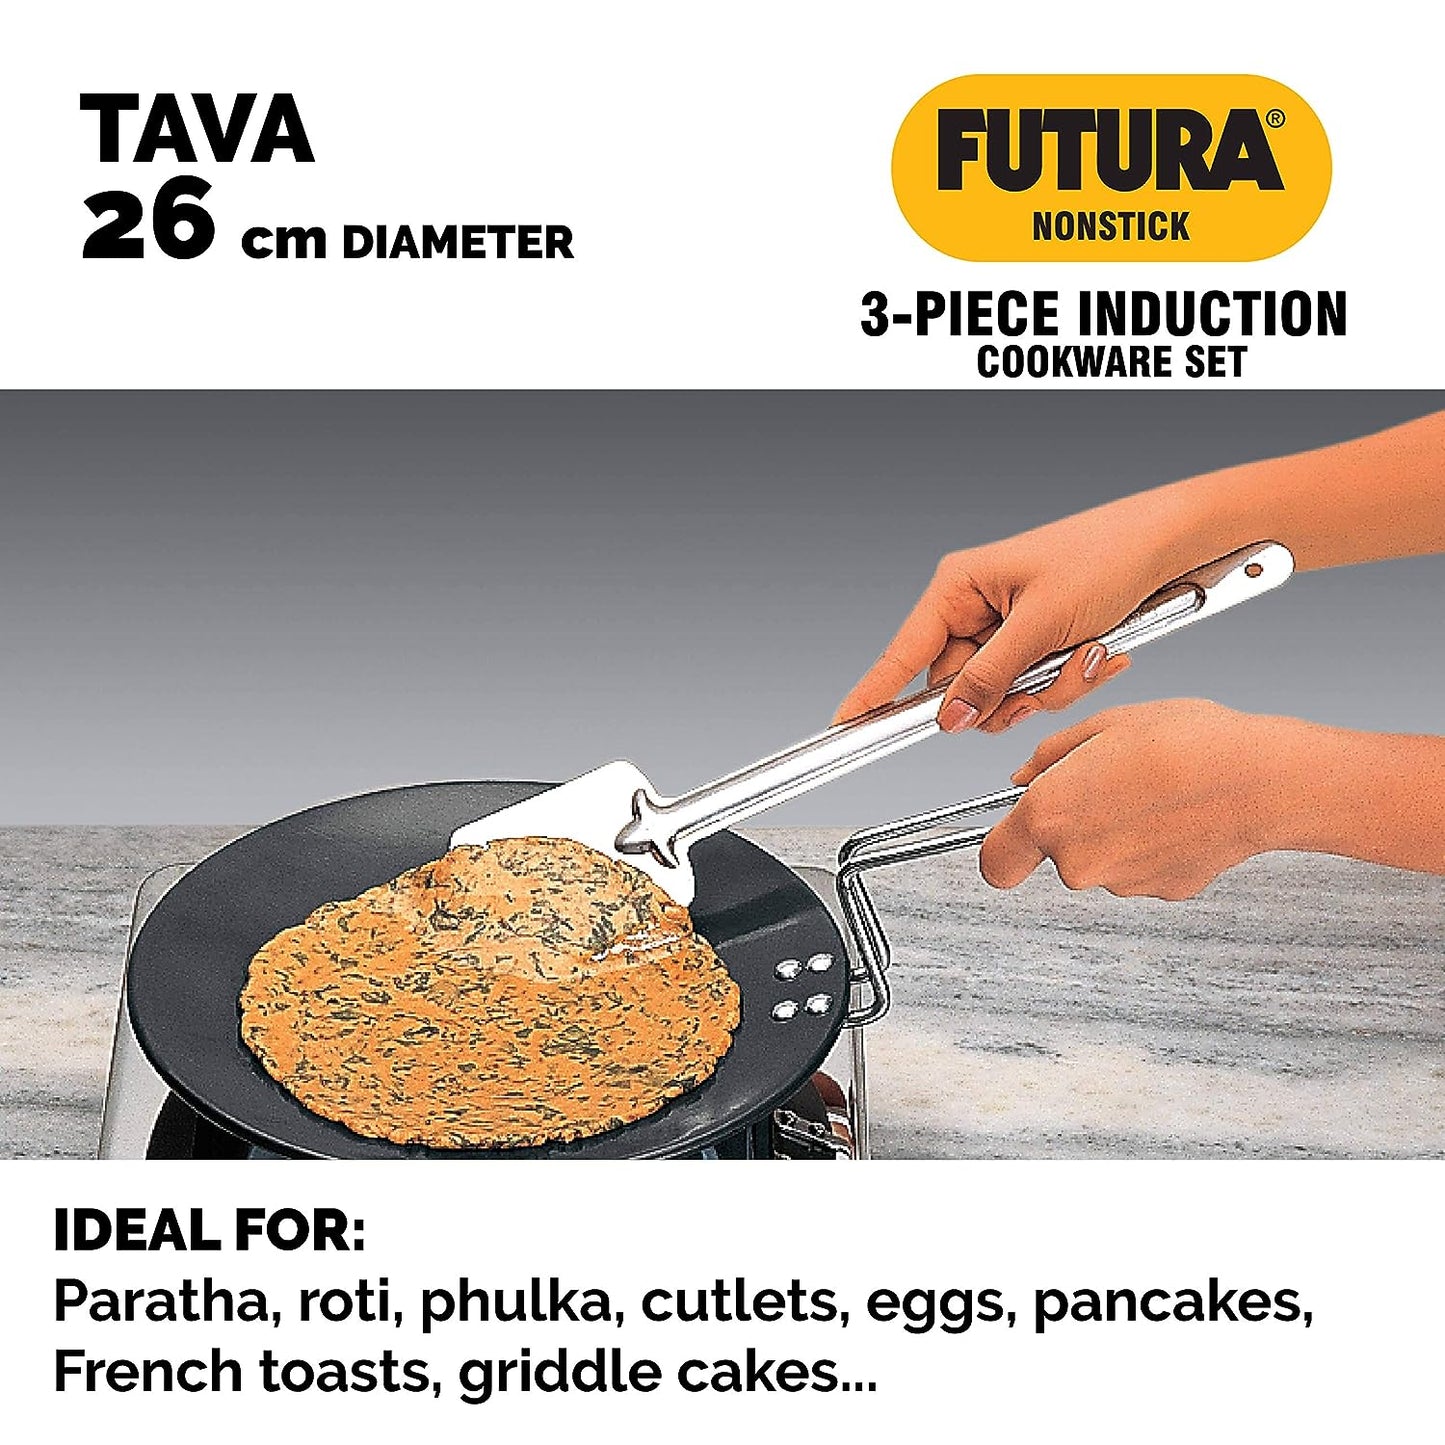 Hawkins Futura 3 Pieces Non Stick Cookware Set No. 2 - 26cm Tava, 26cm Frying Pan and 3.25 Litres Curry Pan with One Stainless Steel Lid - NSET2